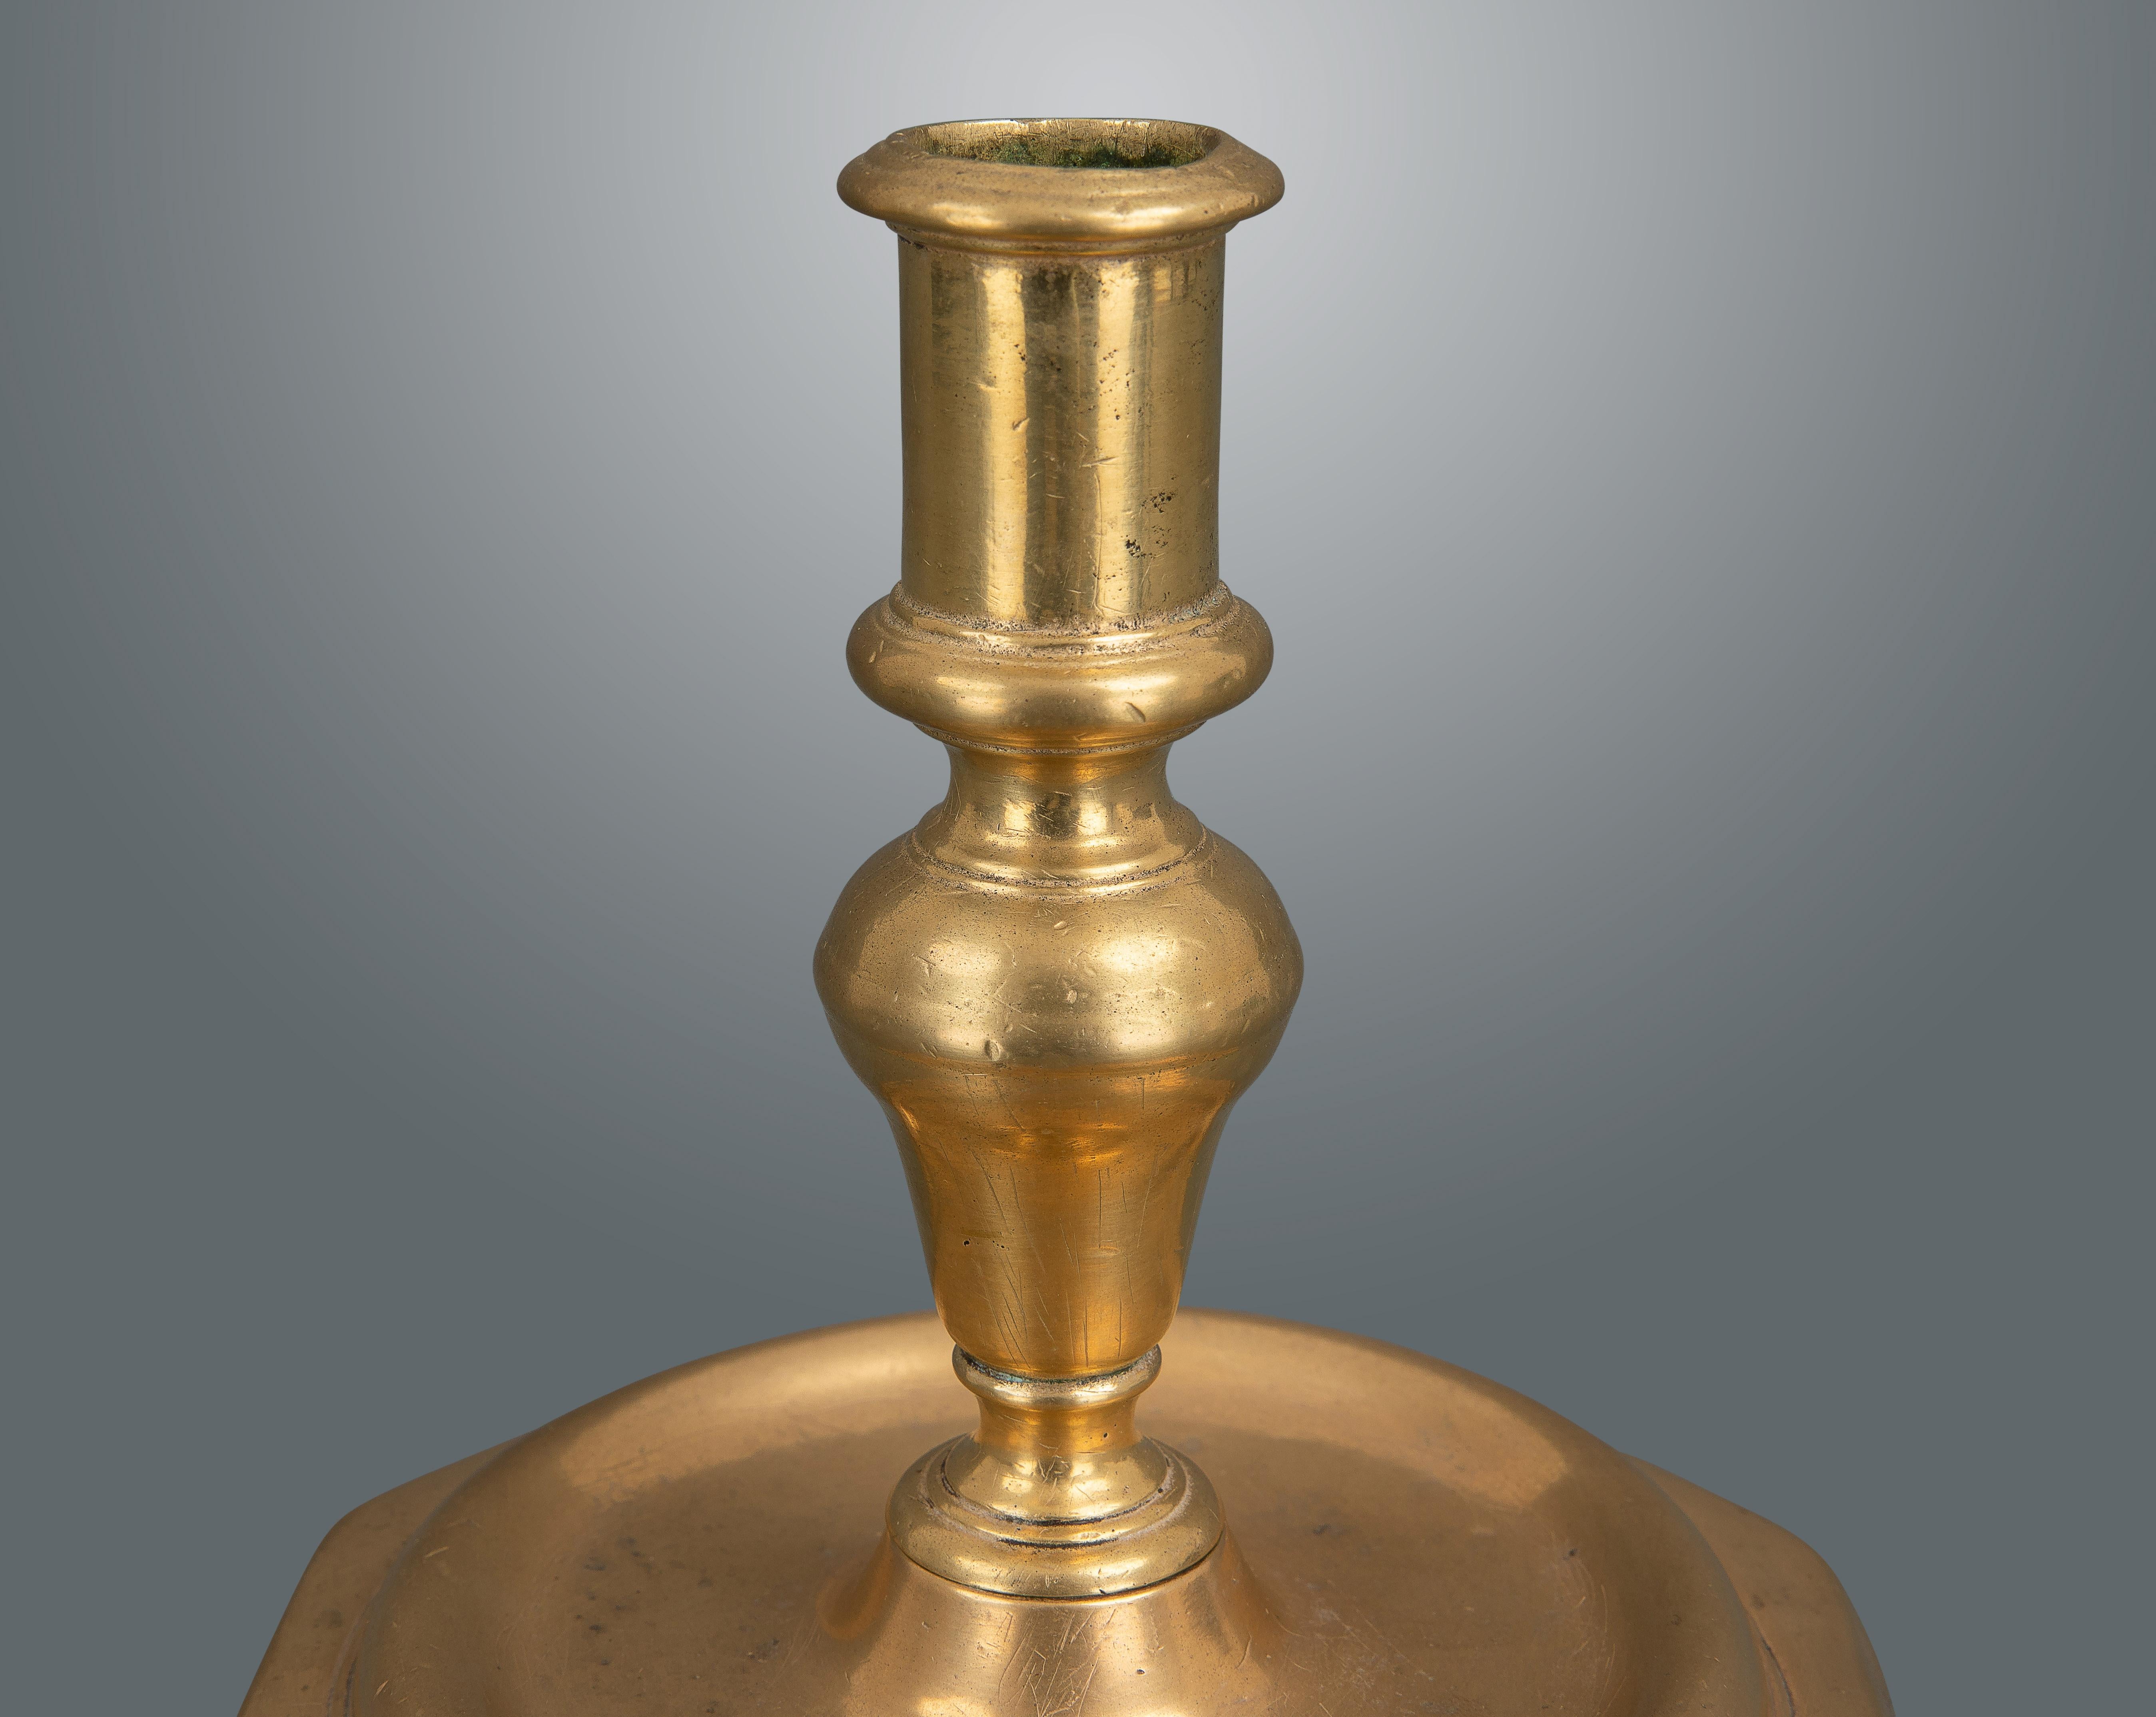 A very nice example in rose colored brass. Heavily cast in two pieces with a screw fitting and six sided base.